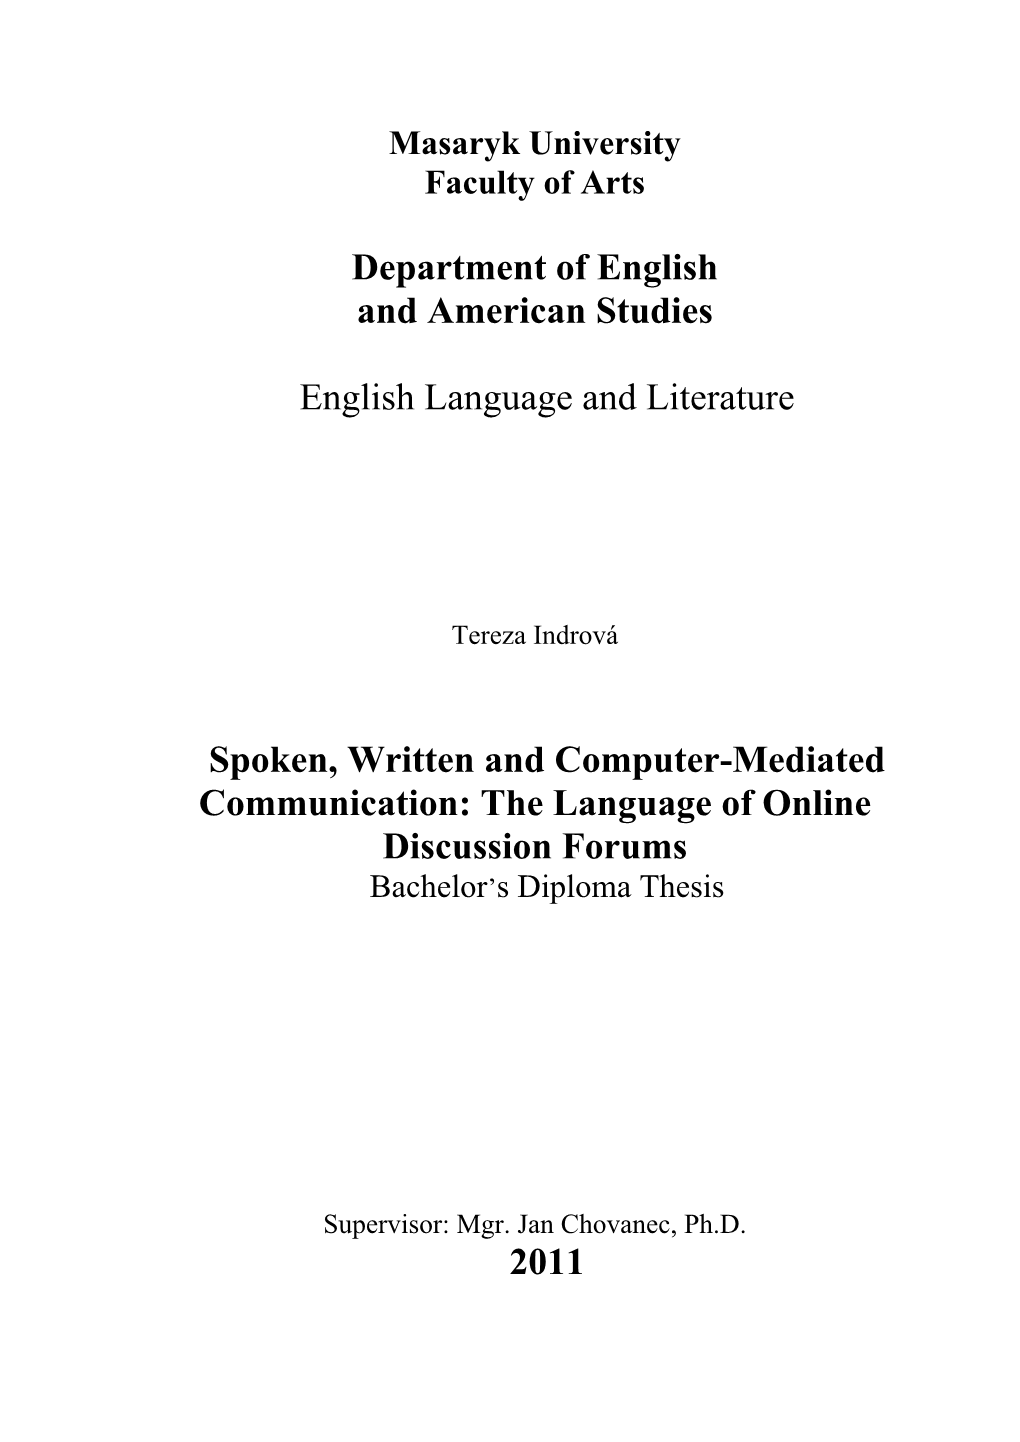 Spoken, Written and Computer-Mediated Forms Of